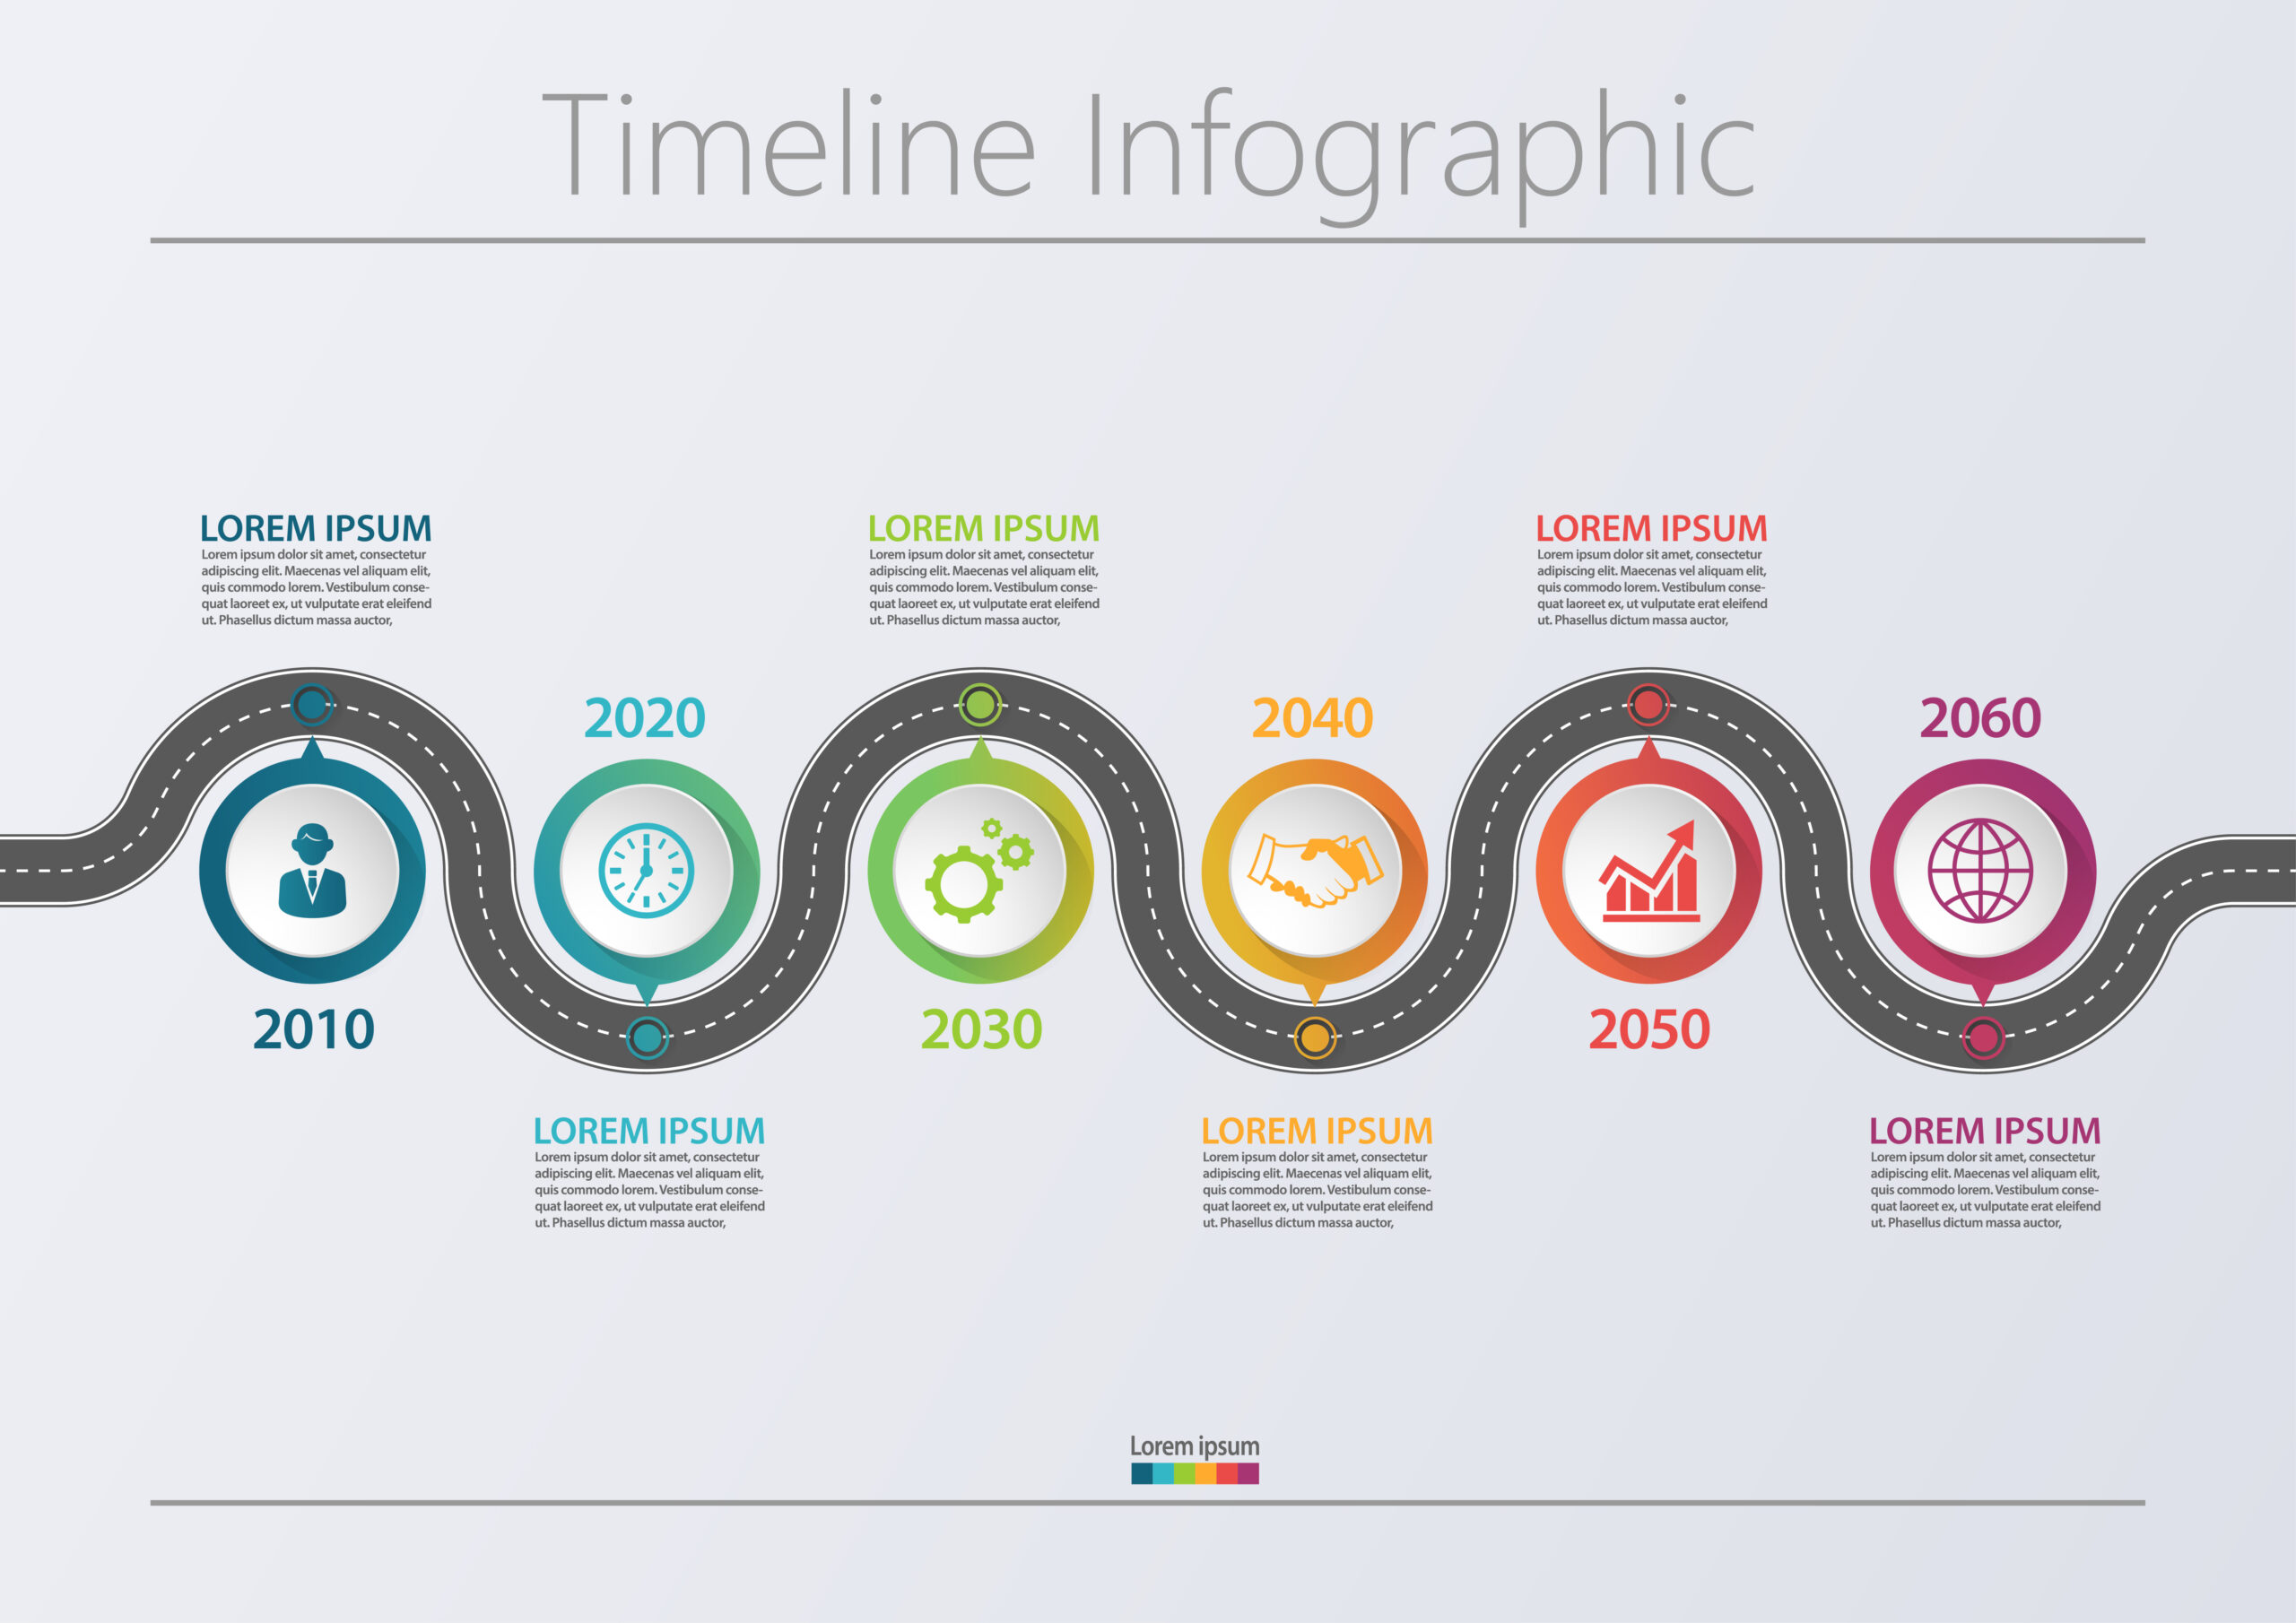 Roadmap with Milestones Infographic - Free Presentation Template for Google Slides and ...